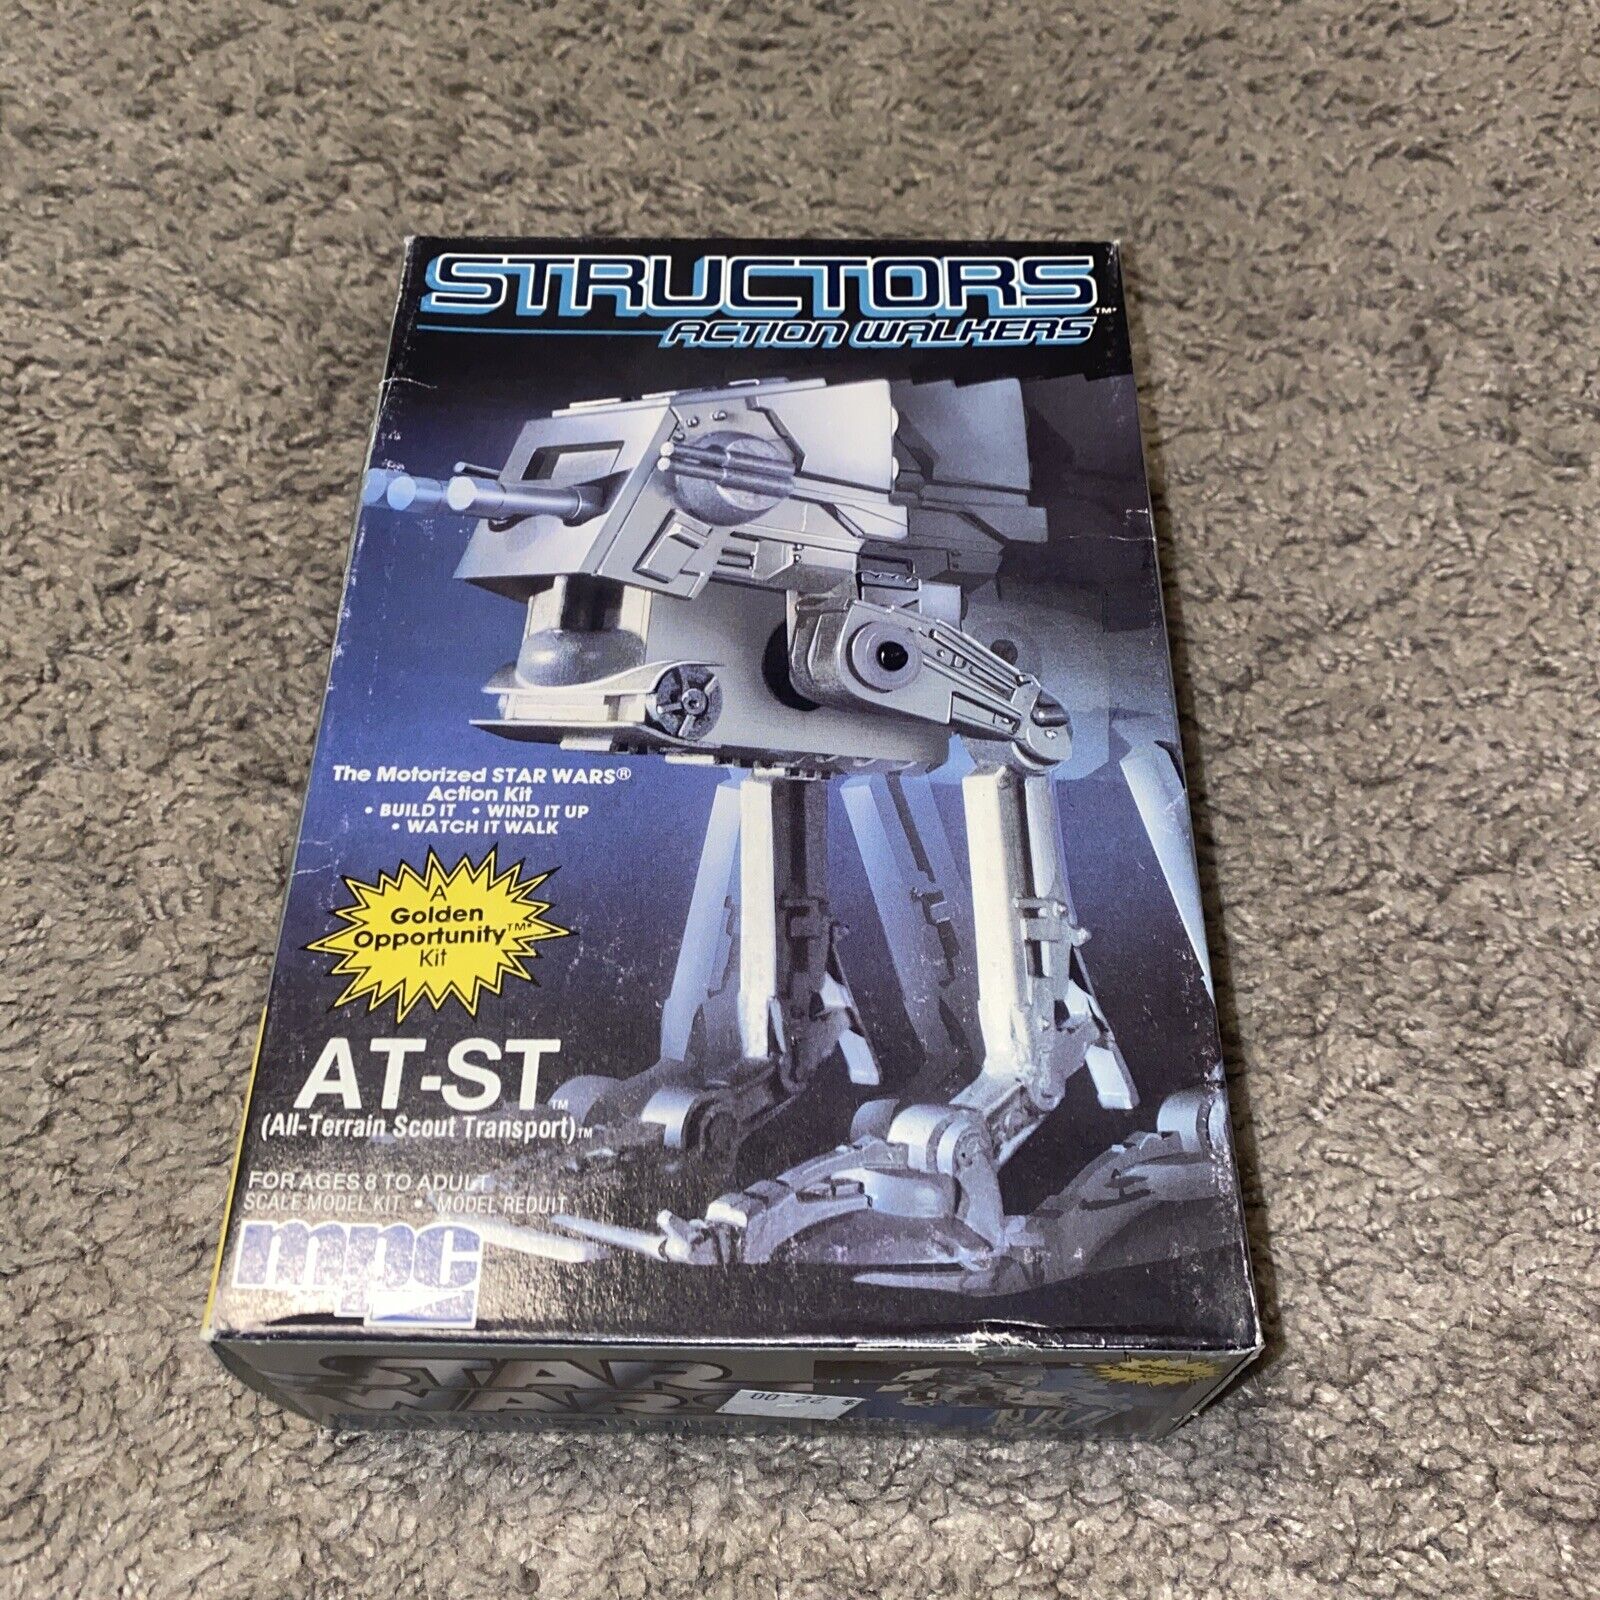 1984 MPC Star Wars AT-ST Structors Action Walkers Model New UNPUNCHED RARE